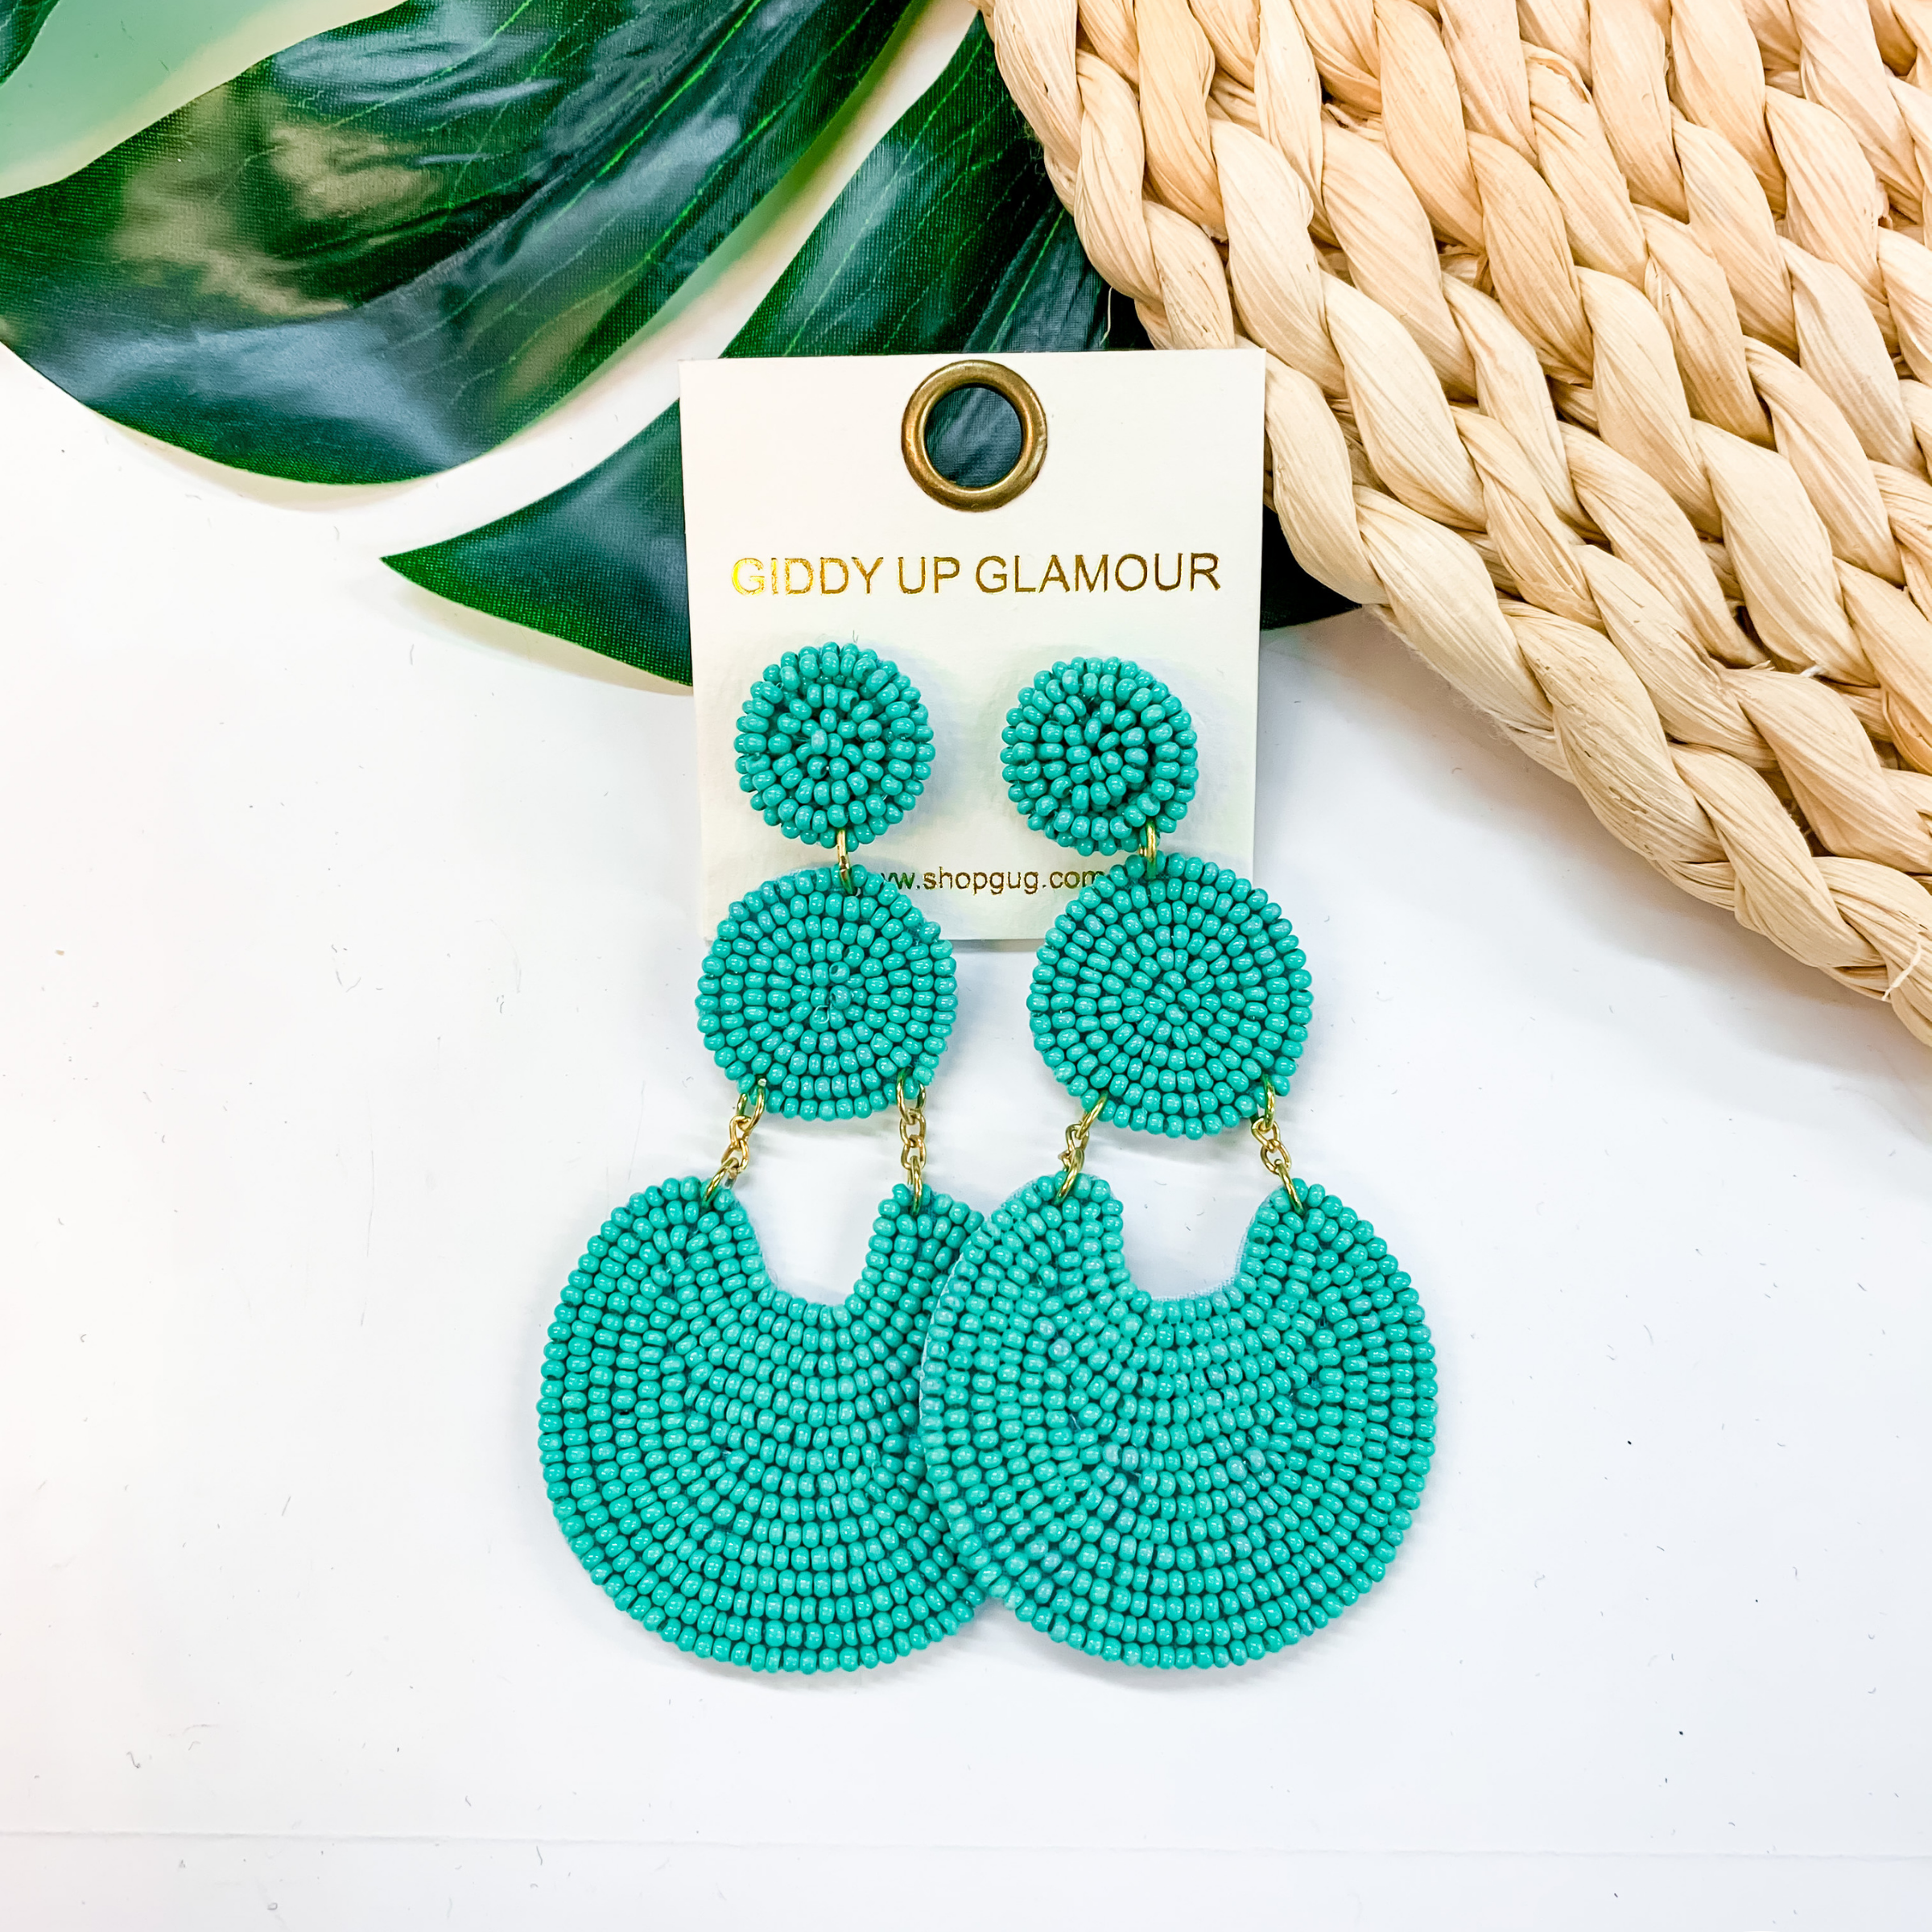 Pure Perfection Seed Bead 3 Tiered Drop Earrings In Turquoise - Giddy Up Glamour Boutique